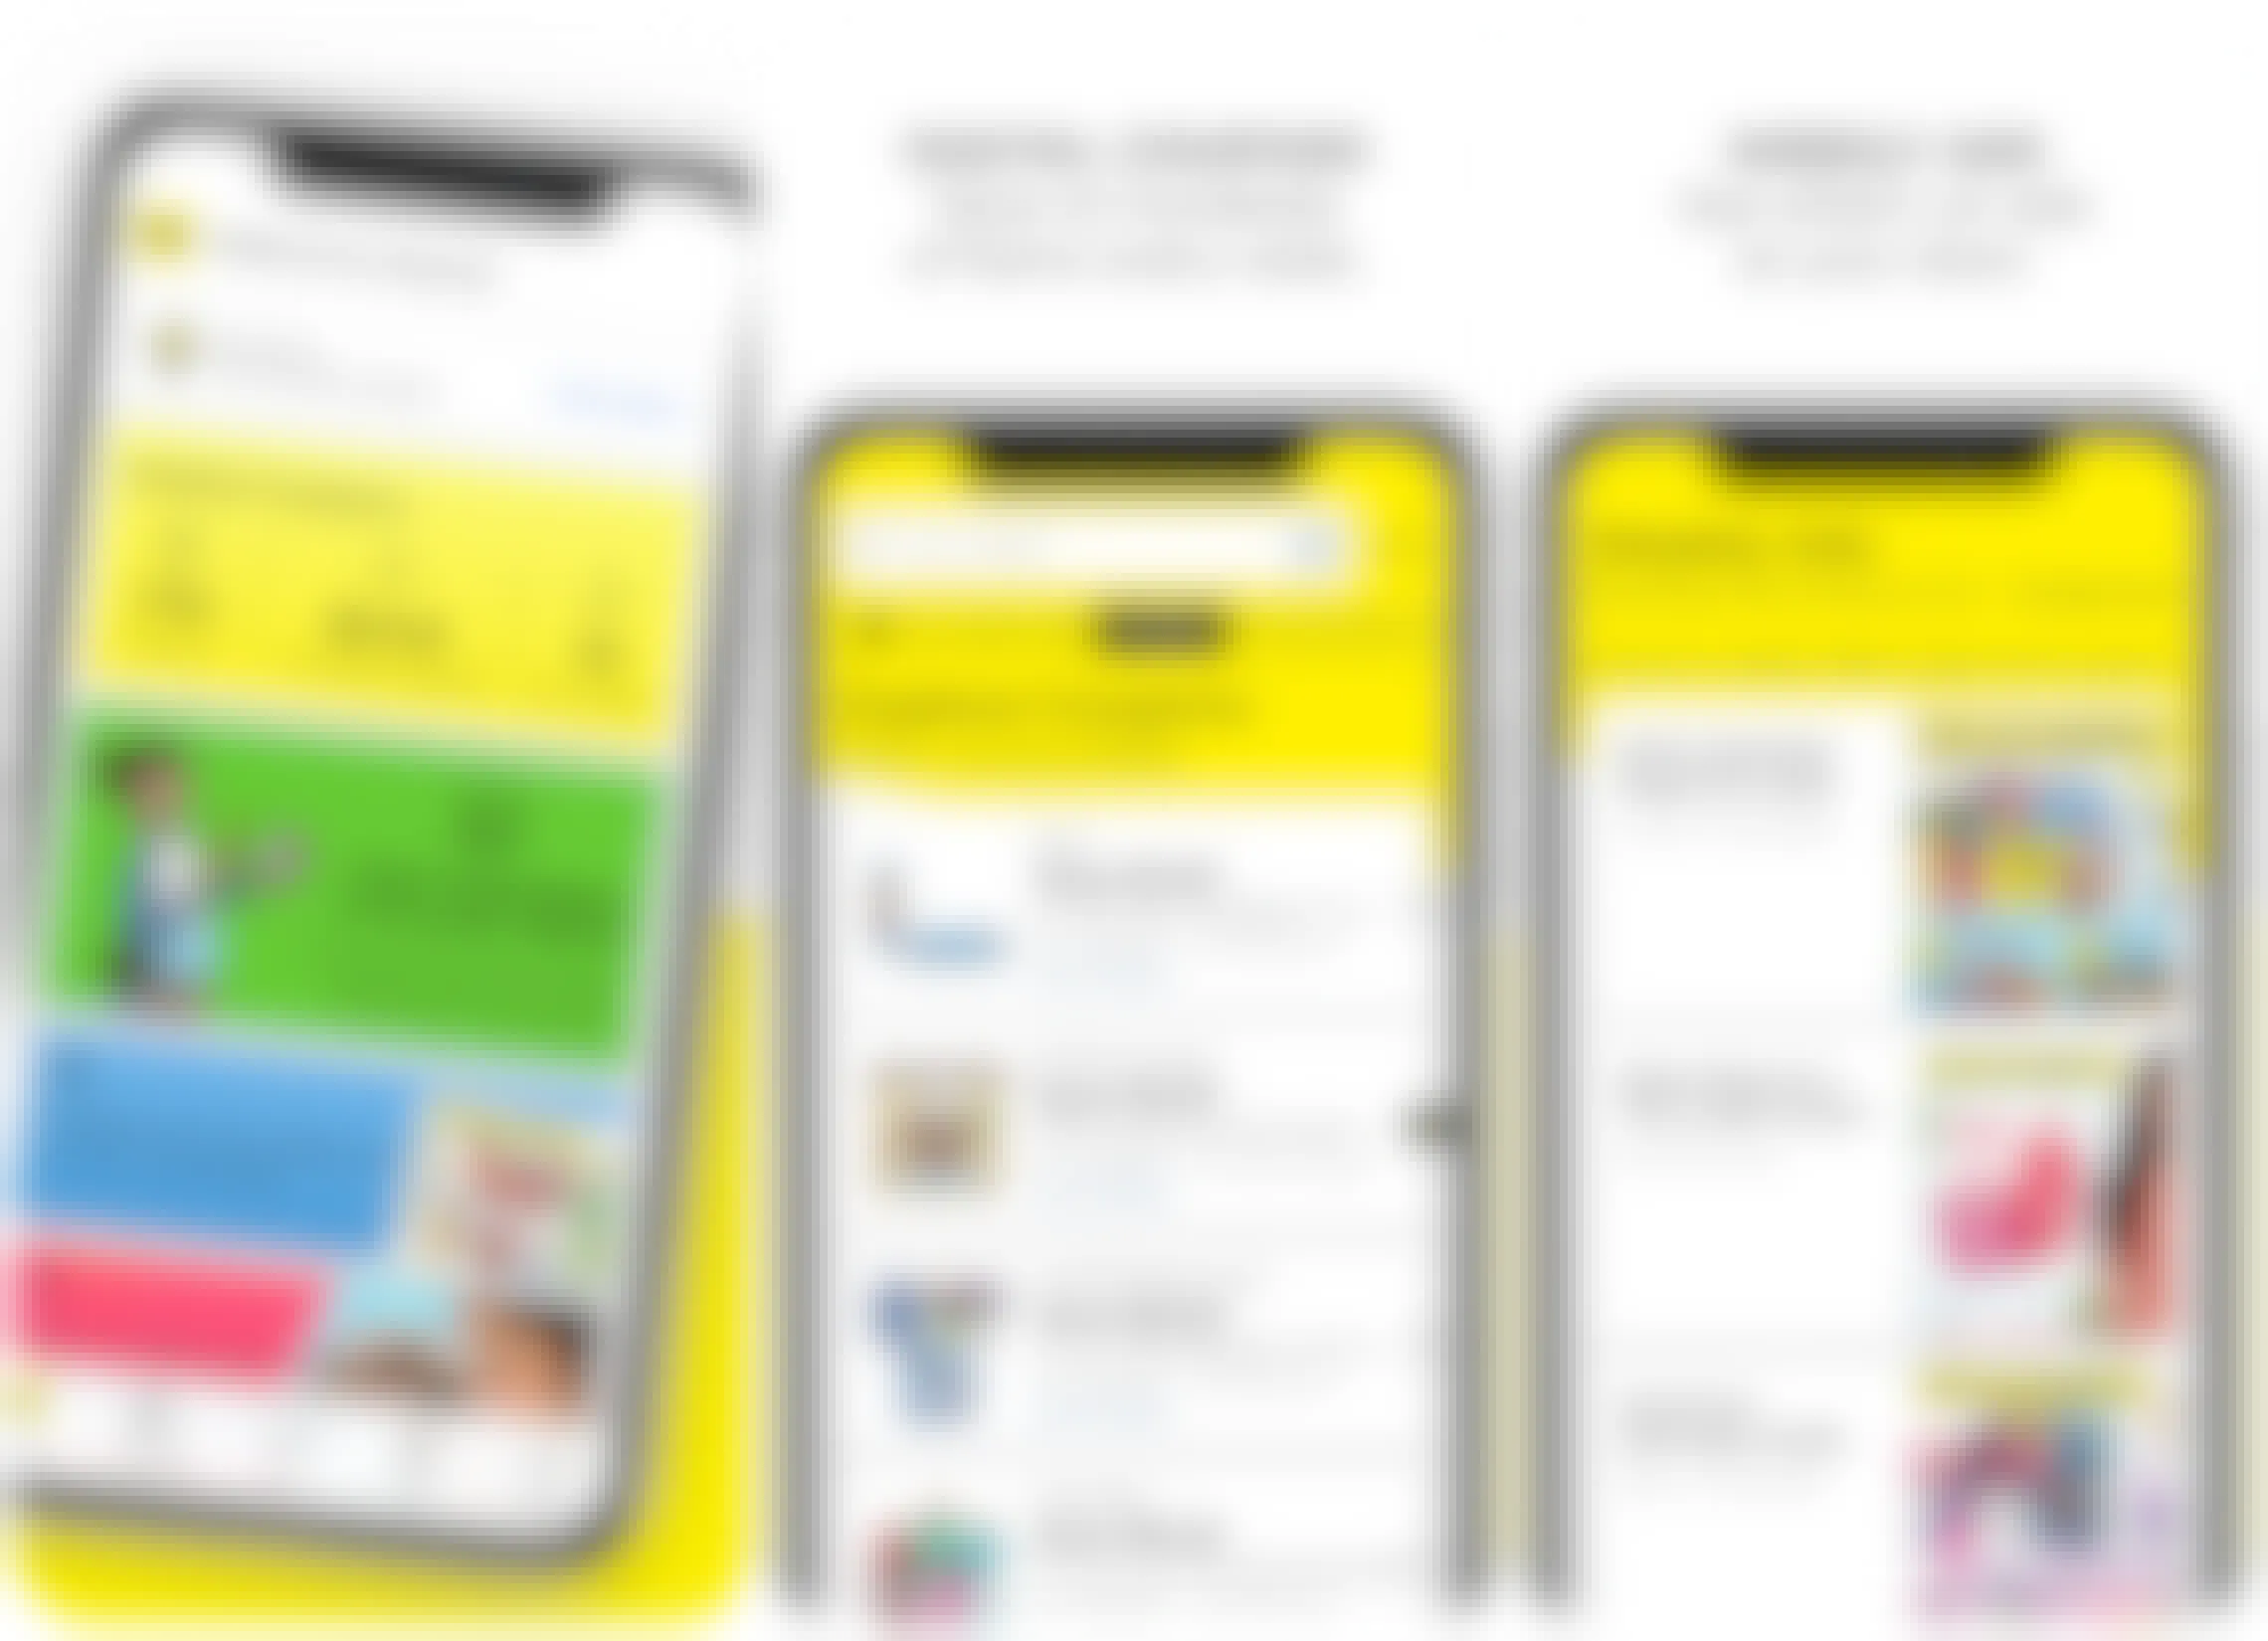 Dollar General app digital coupons and weekly ad